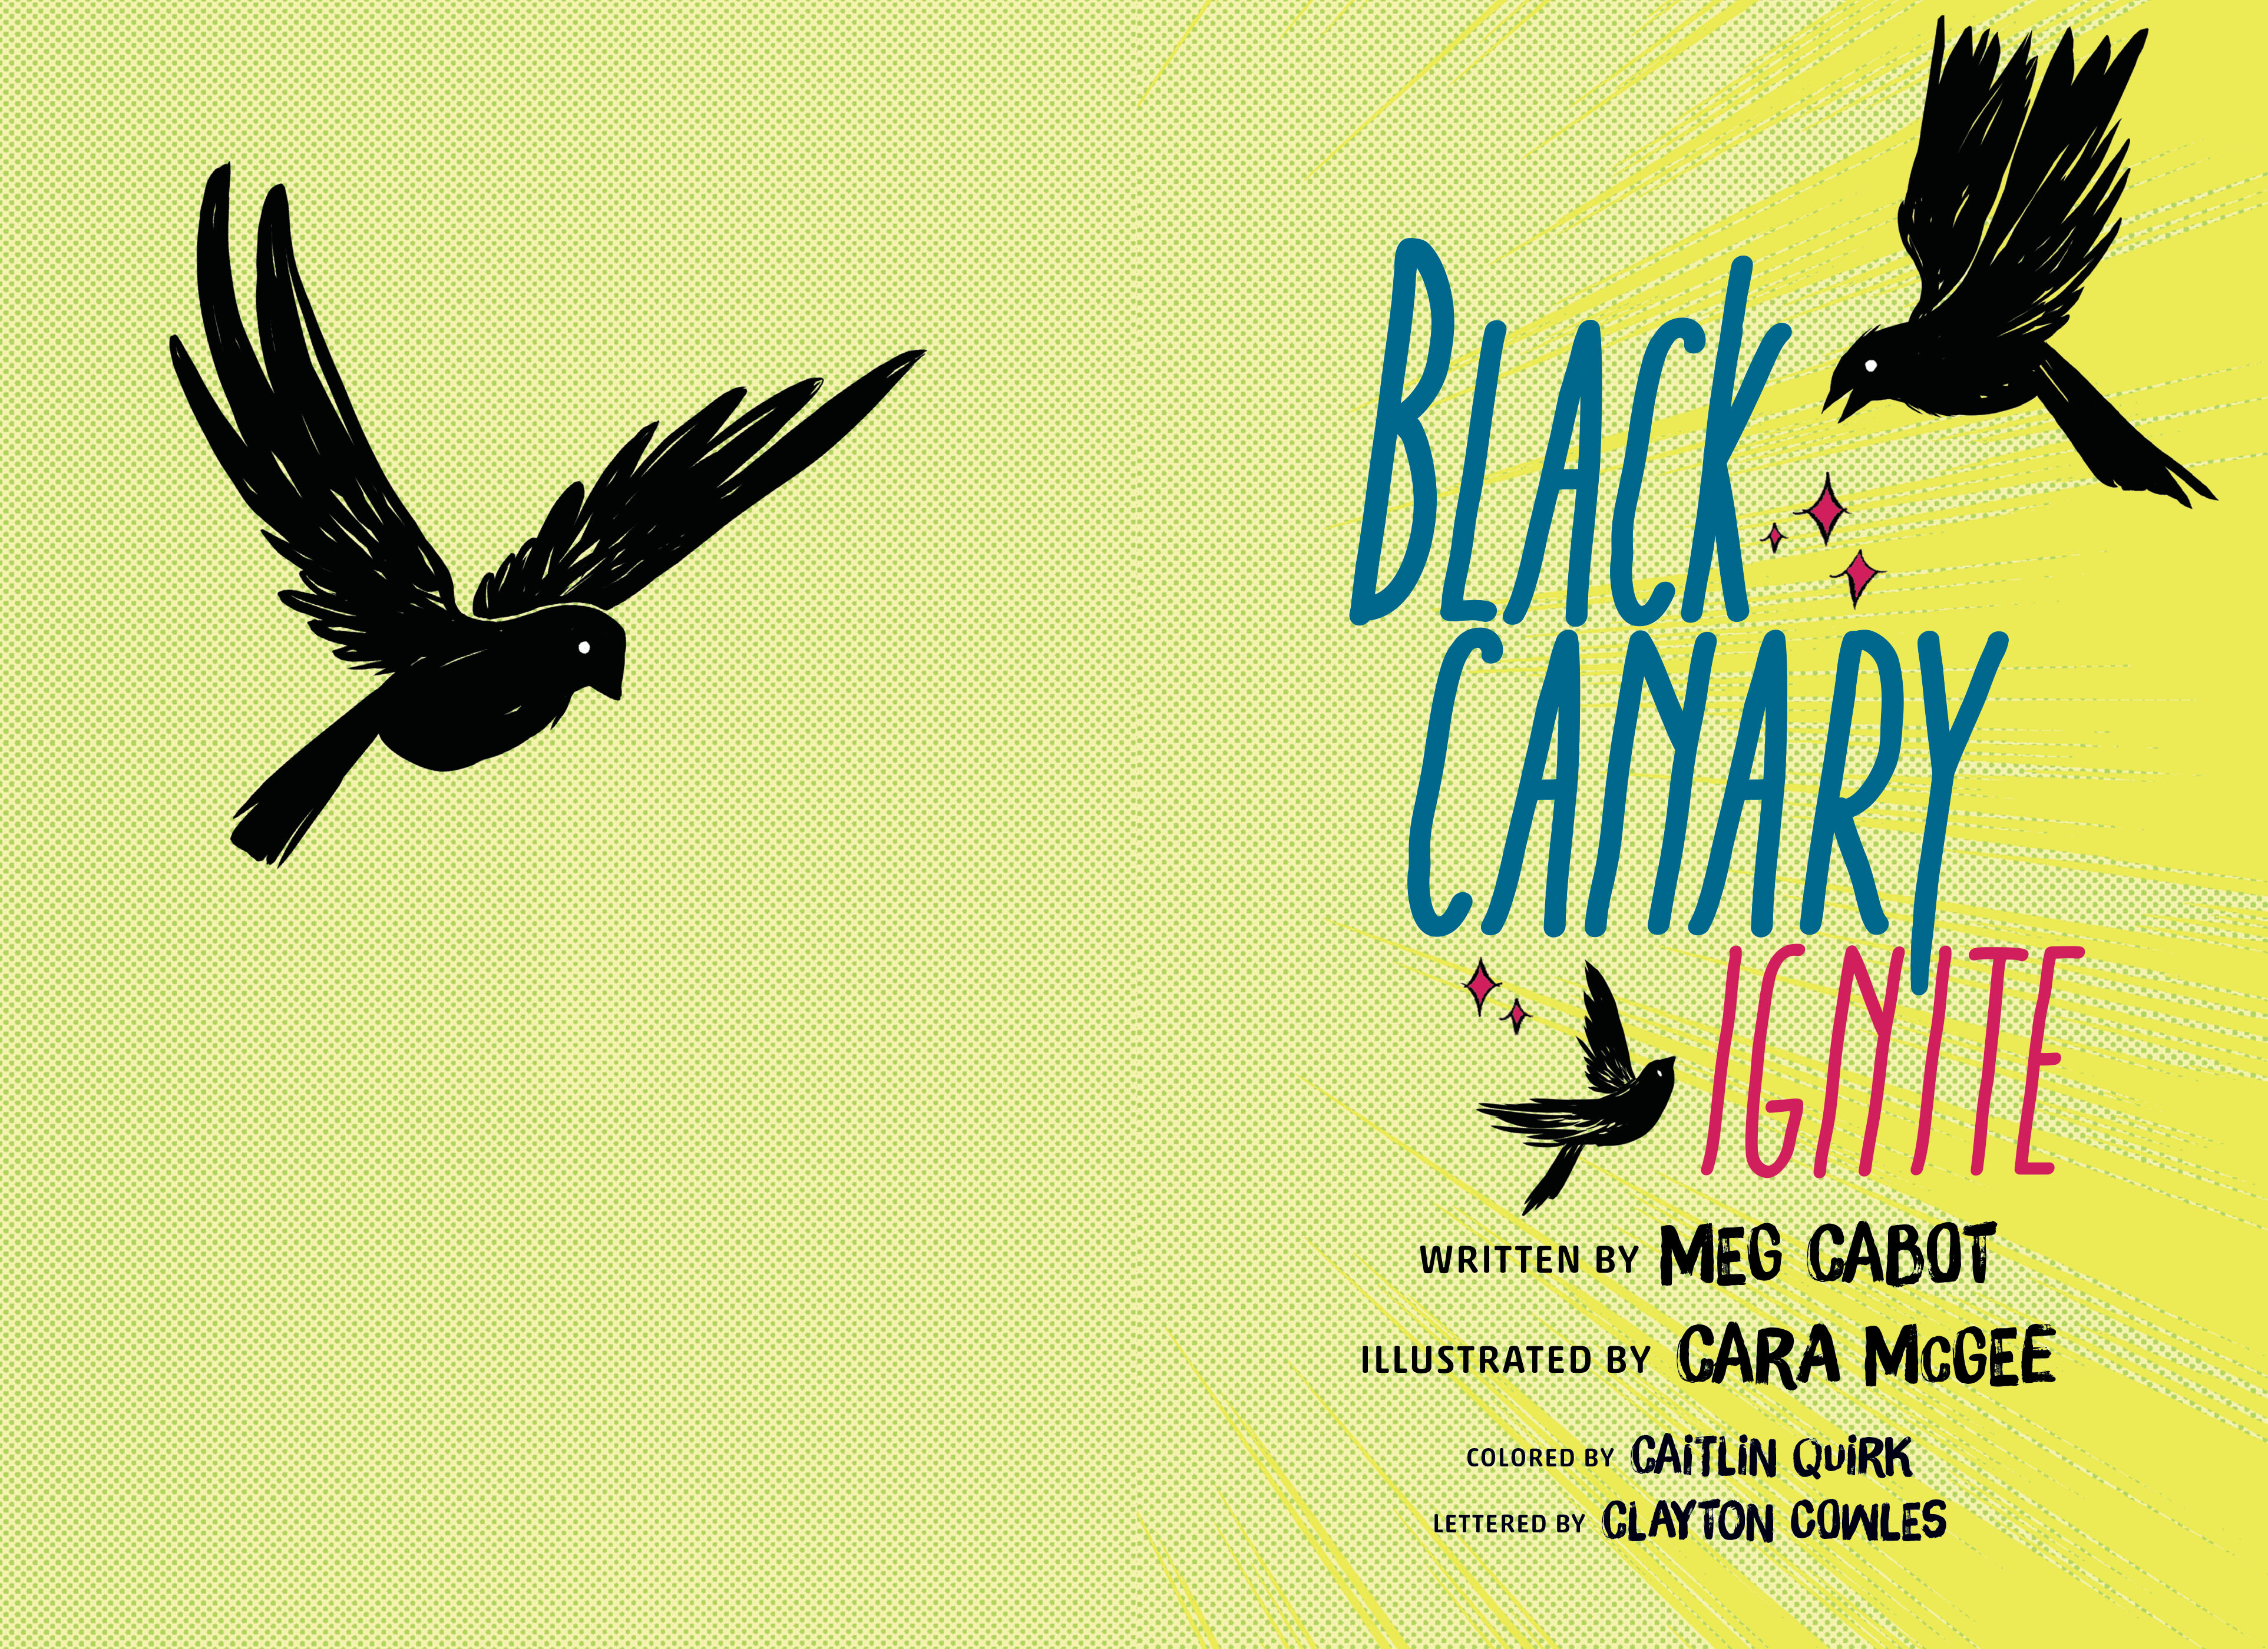 Read online Black Canary: Ignite comic -  Issue # TPB - 3